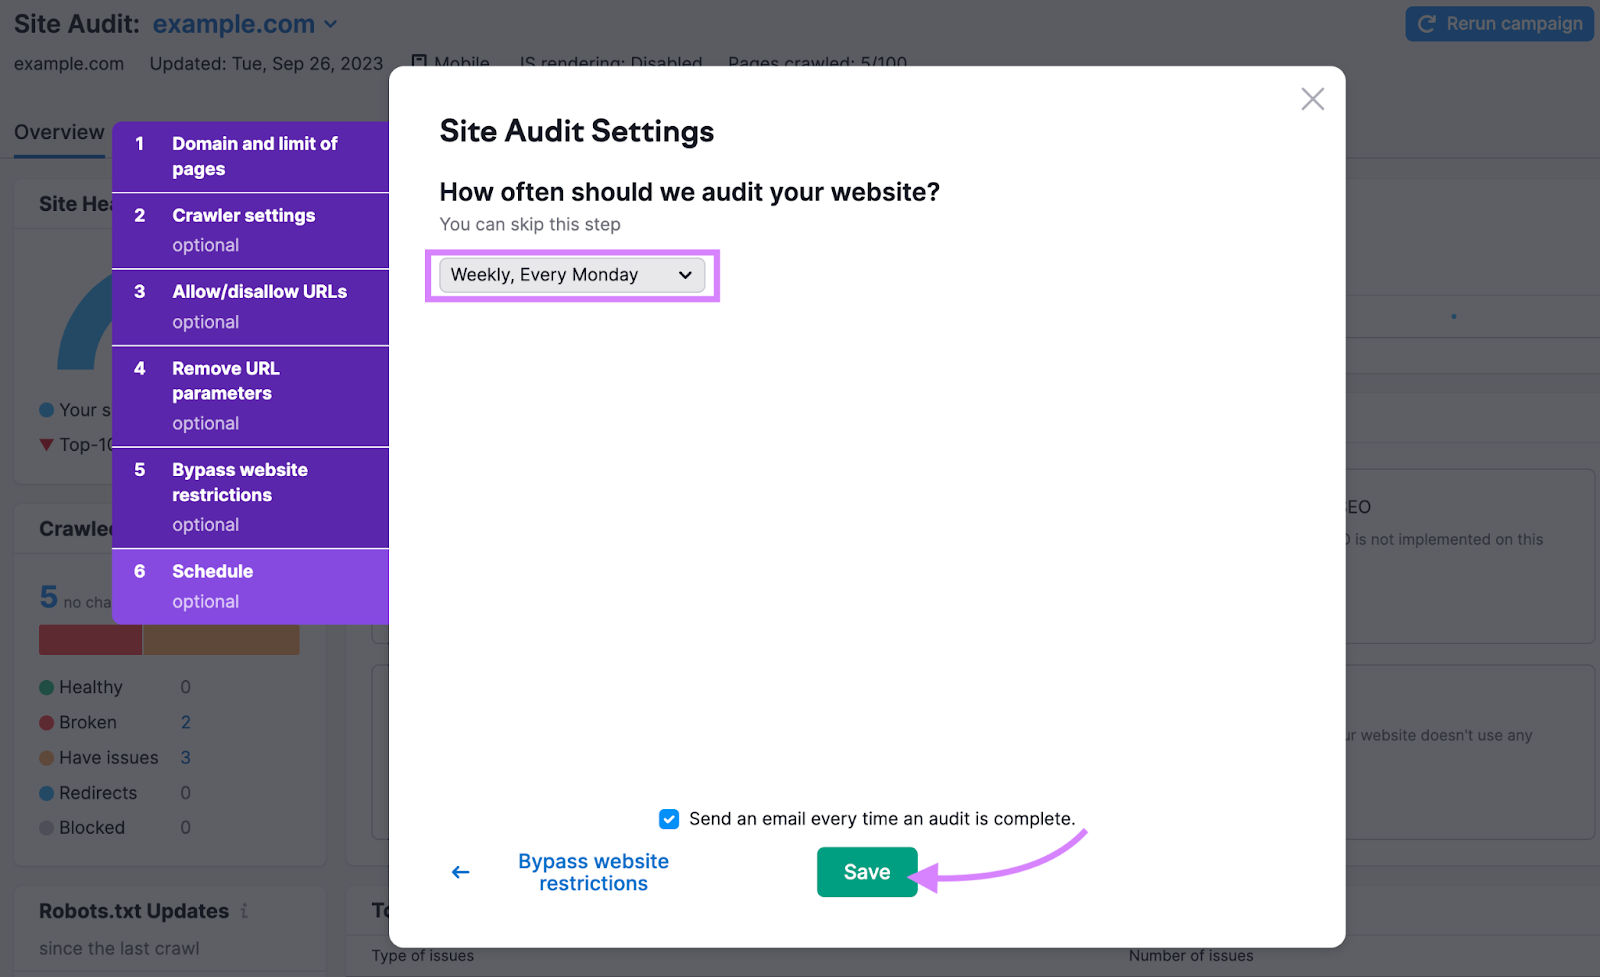 “Site Audit Settings” schedule page